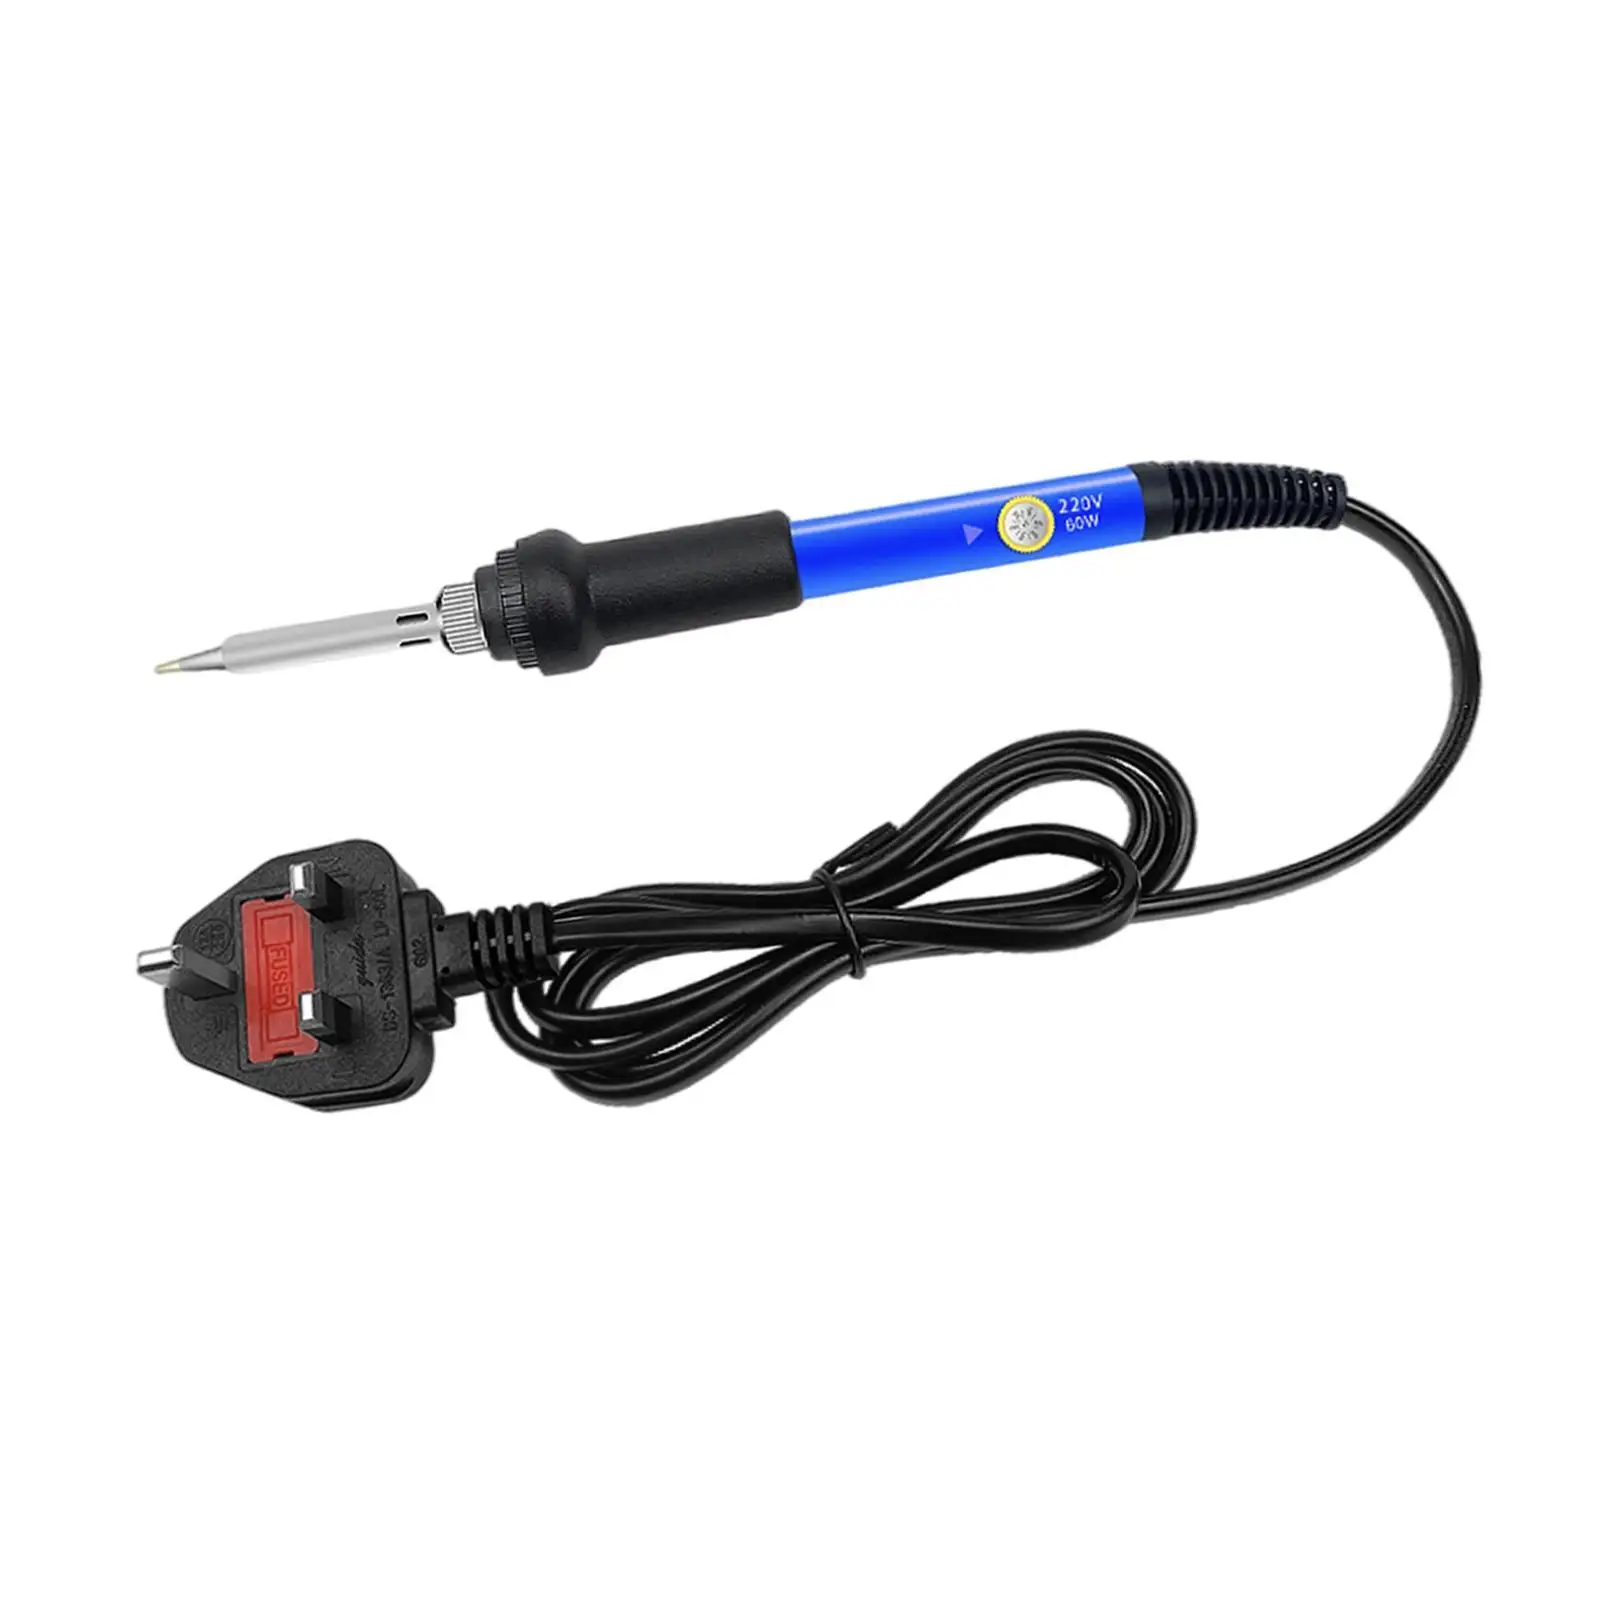 Soldering Iron 60W 220V  Thermostatic Design for Welding Tools UK